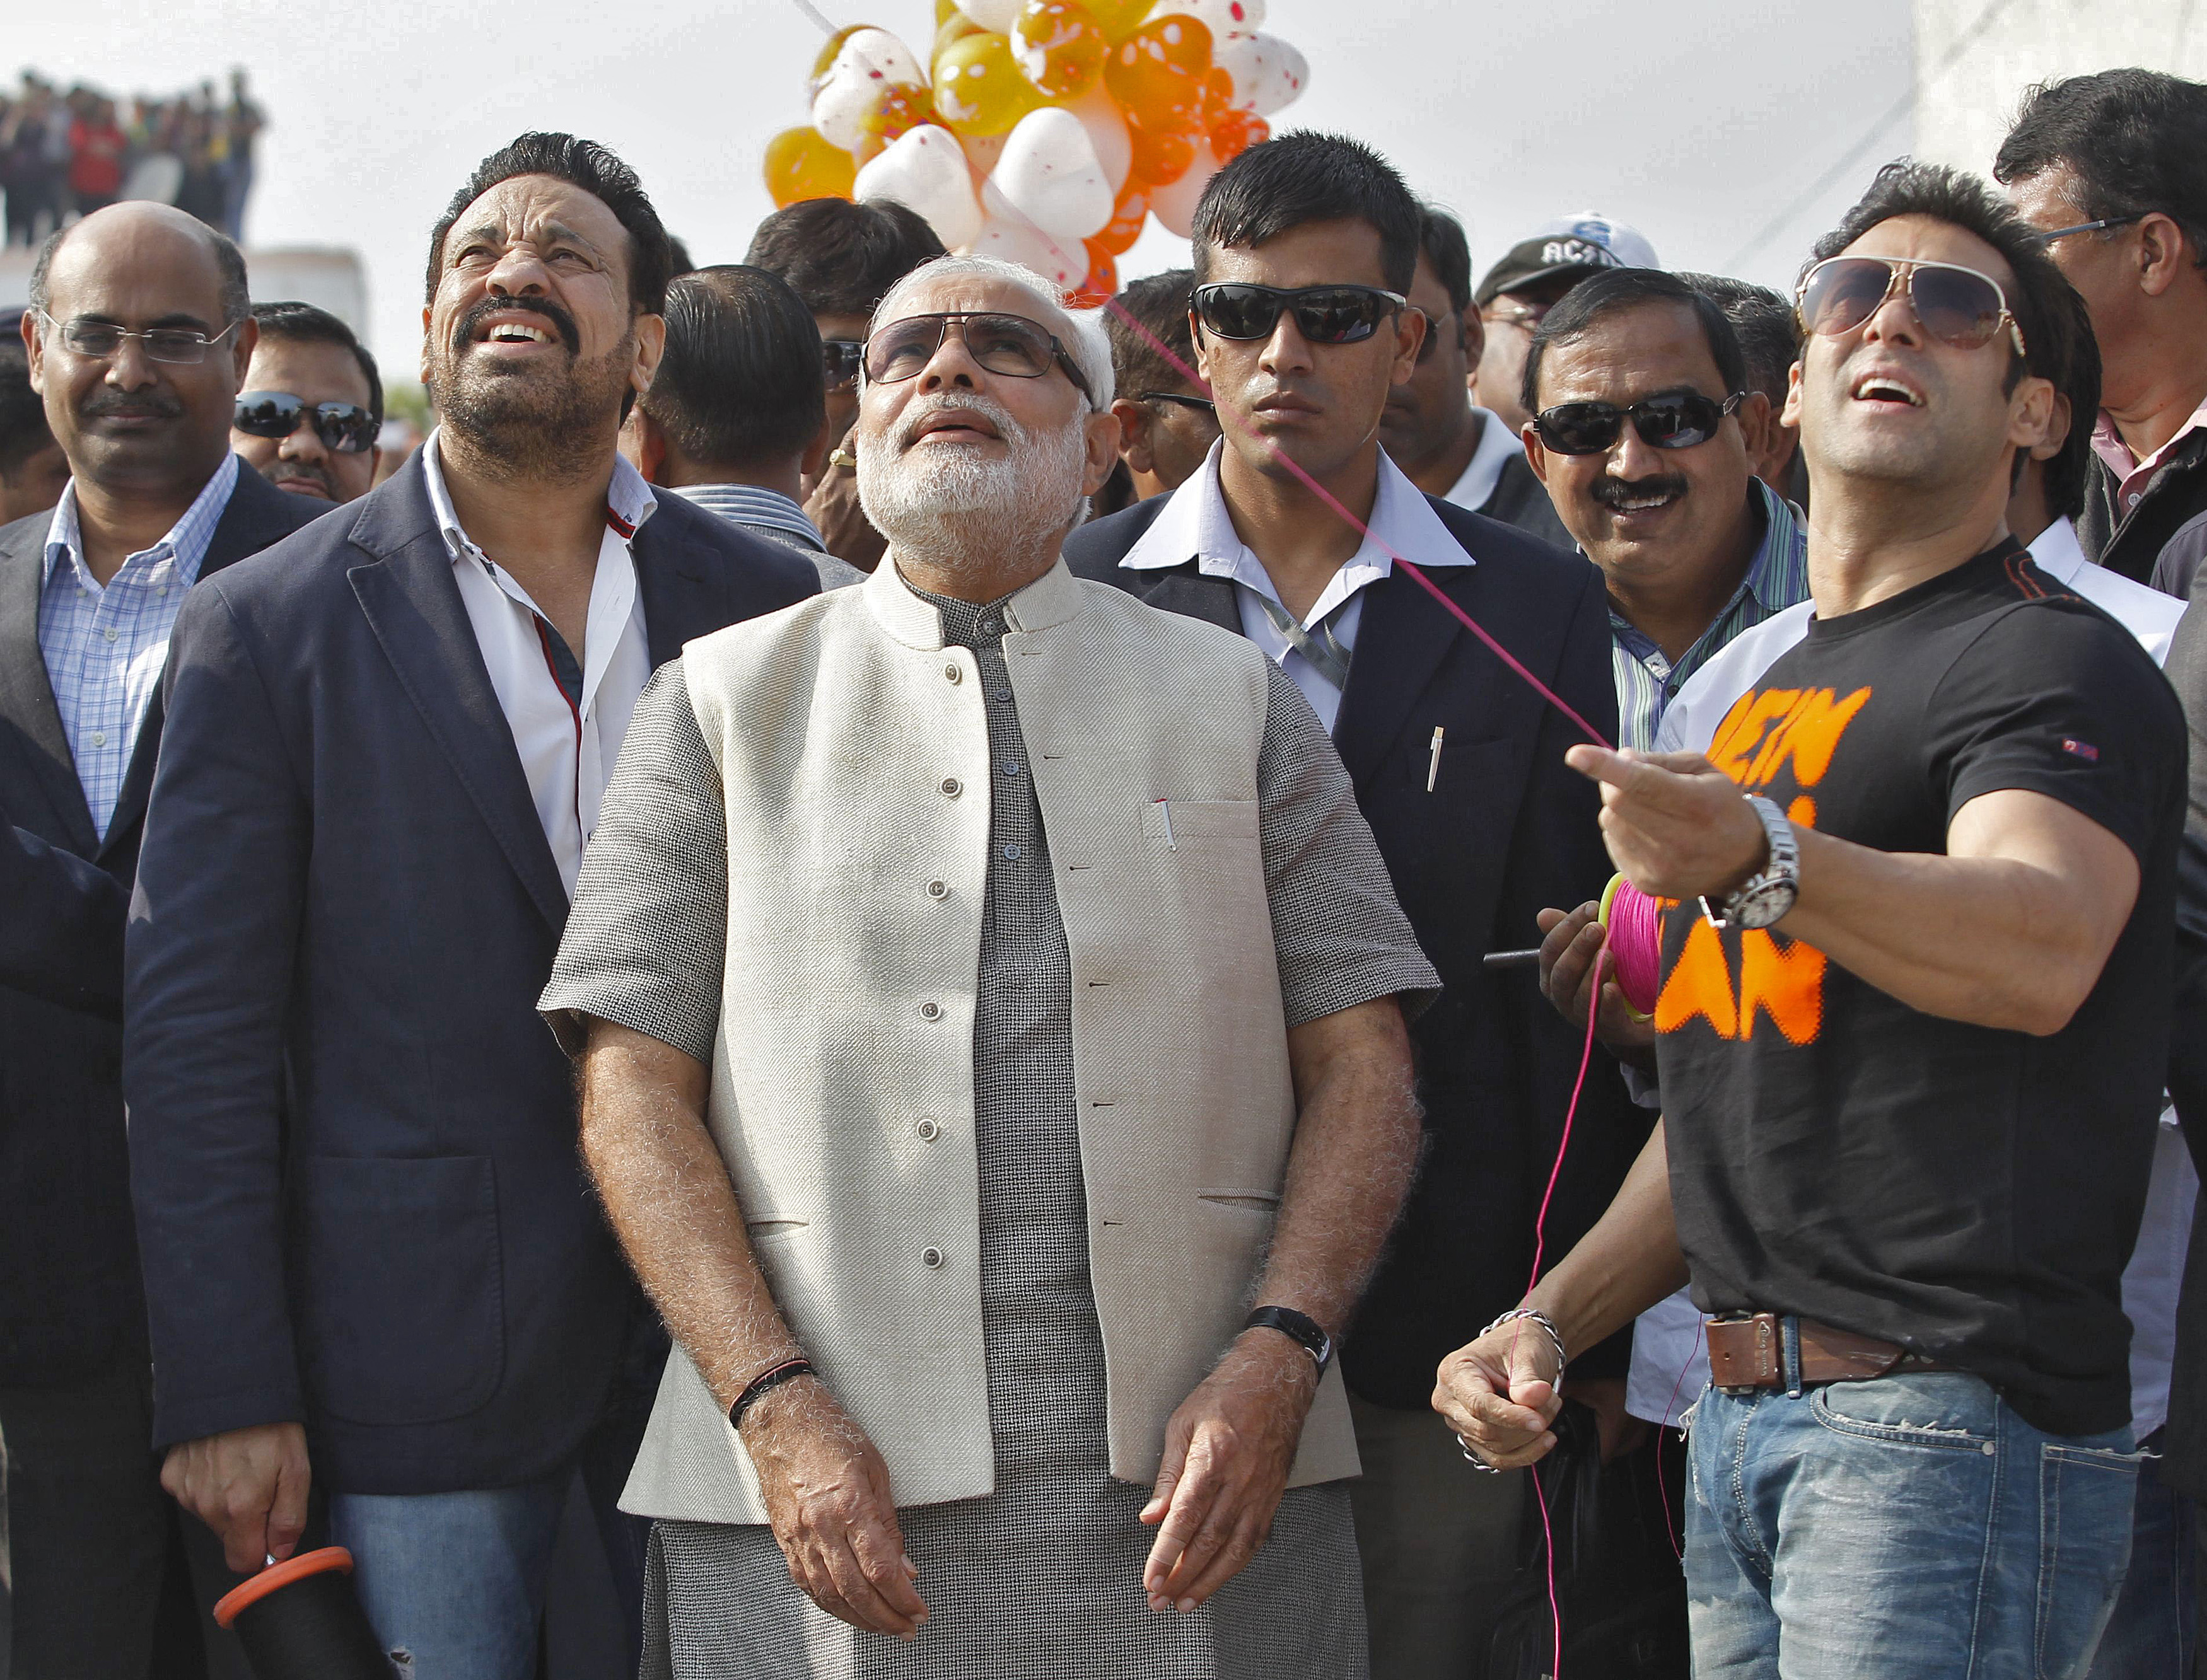 Bollywood actor Salman Khan (R) flies a kite as Hindu nationalist Narendra Modi (C), prime ministerial candidate for India's main opposition Bharatiya Janata Party (BJP) and Gujarat's chief minister, watches during a kite flying festival in the western Indian city of Ahmedabad January 14, 2014. (Amit Dave—Reuters)